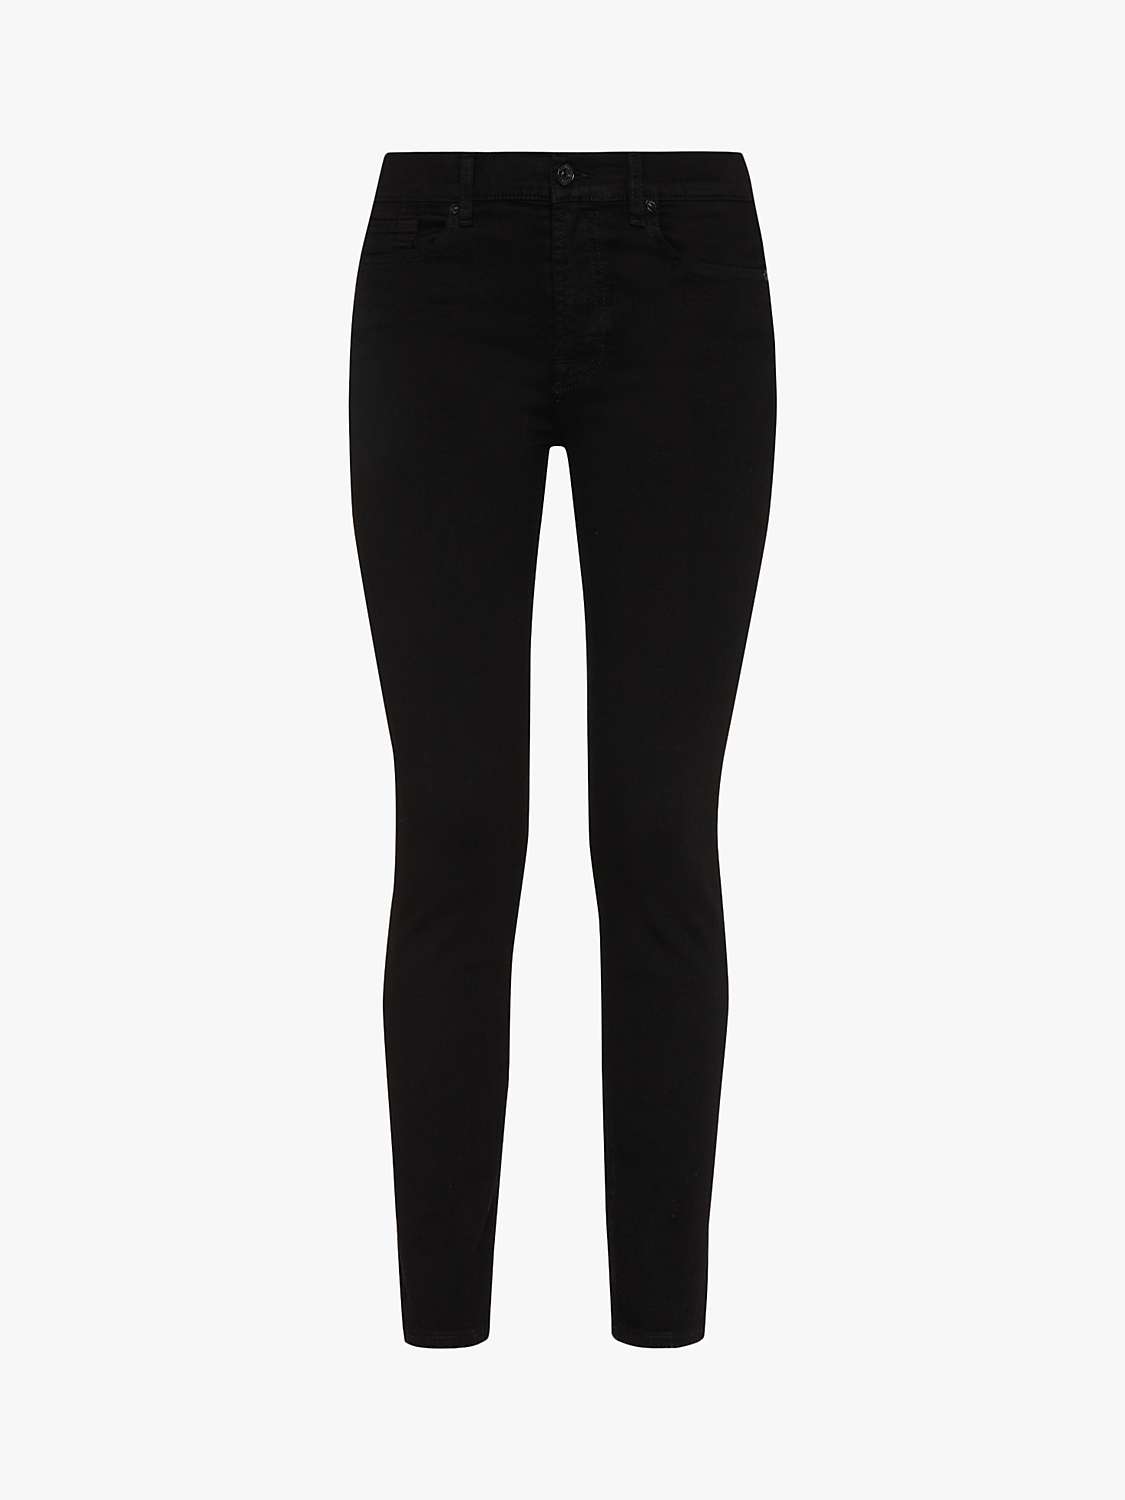 Buy 7 For All Mankind Roxanne B(Air) Jeans, Rinsed Black Online at johnlewis.com